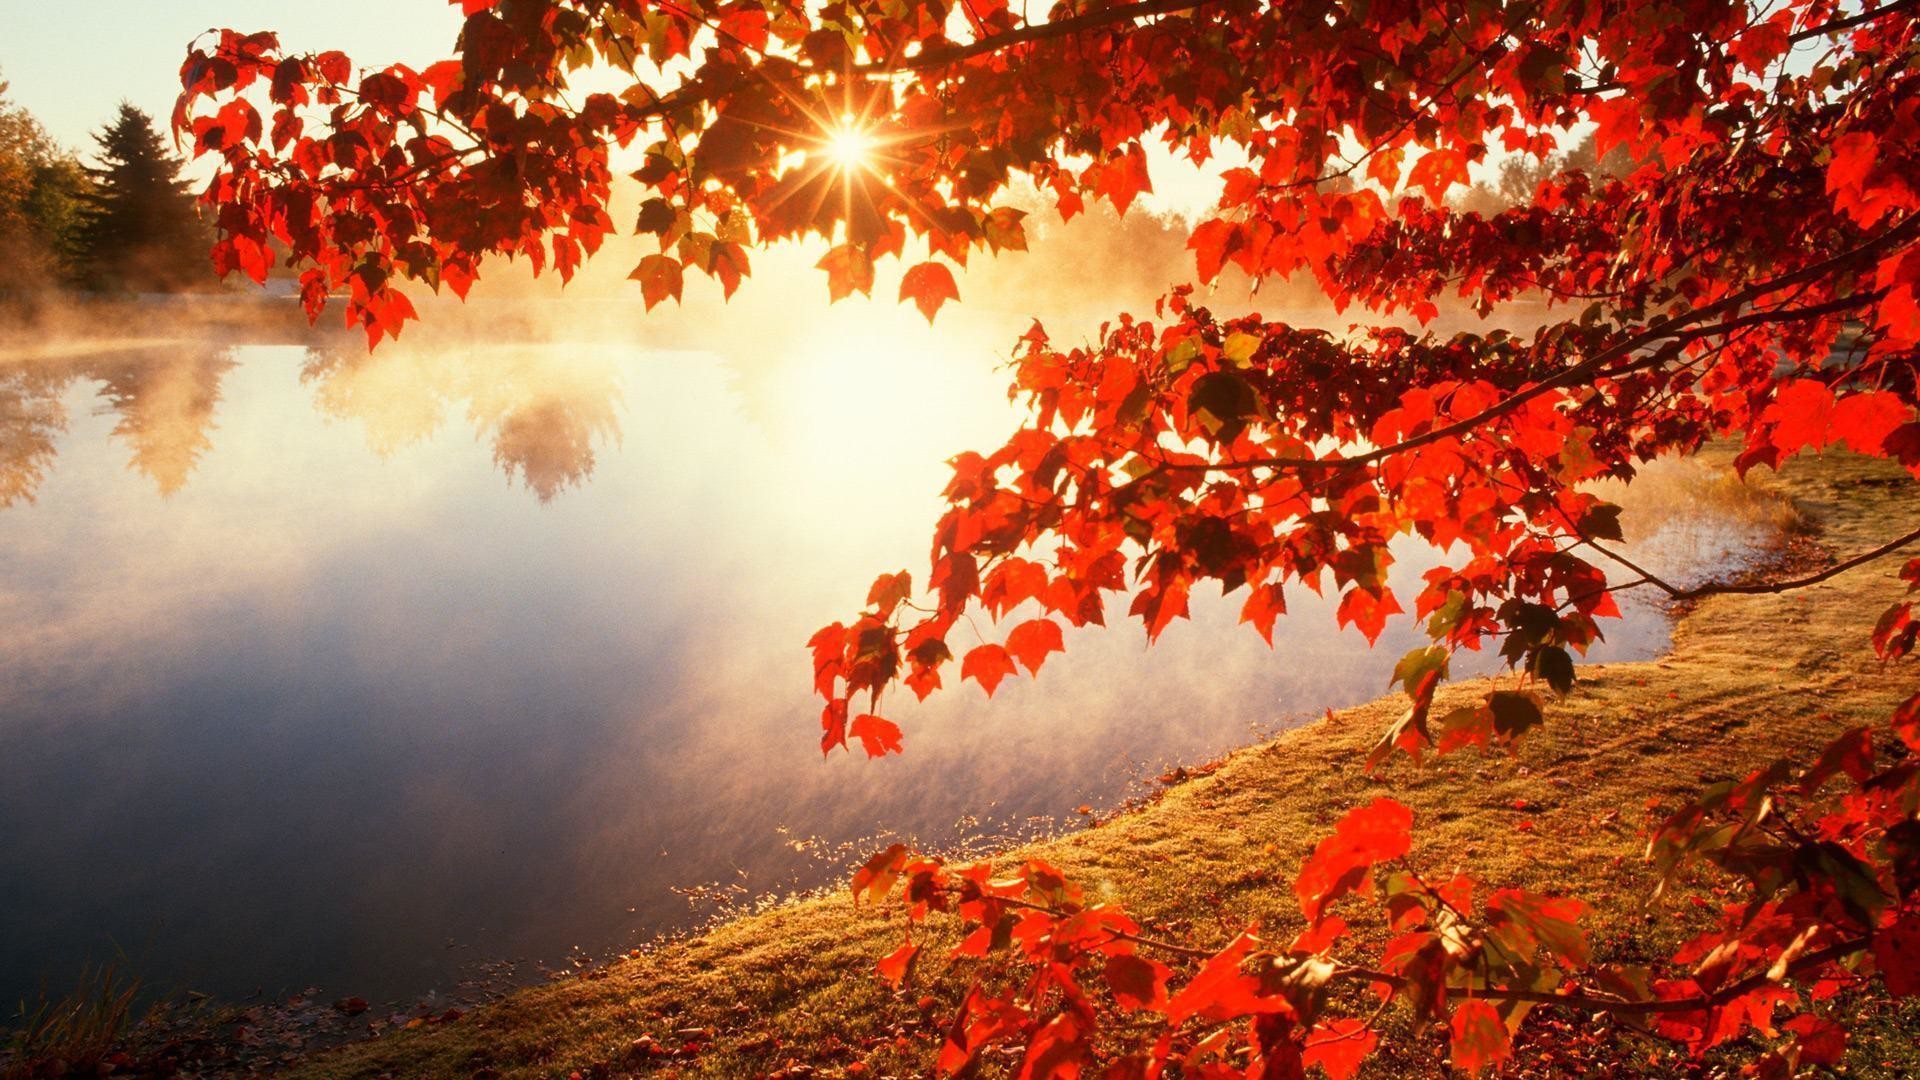 1920x1080 Autumn Leaves Wallpapers - HD Wallpapers Inn